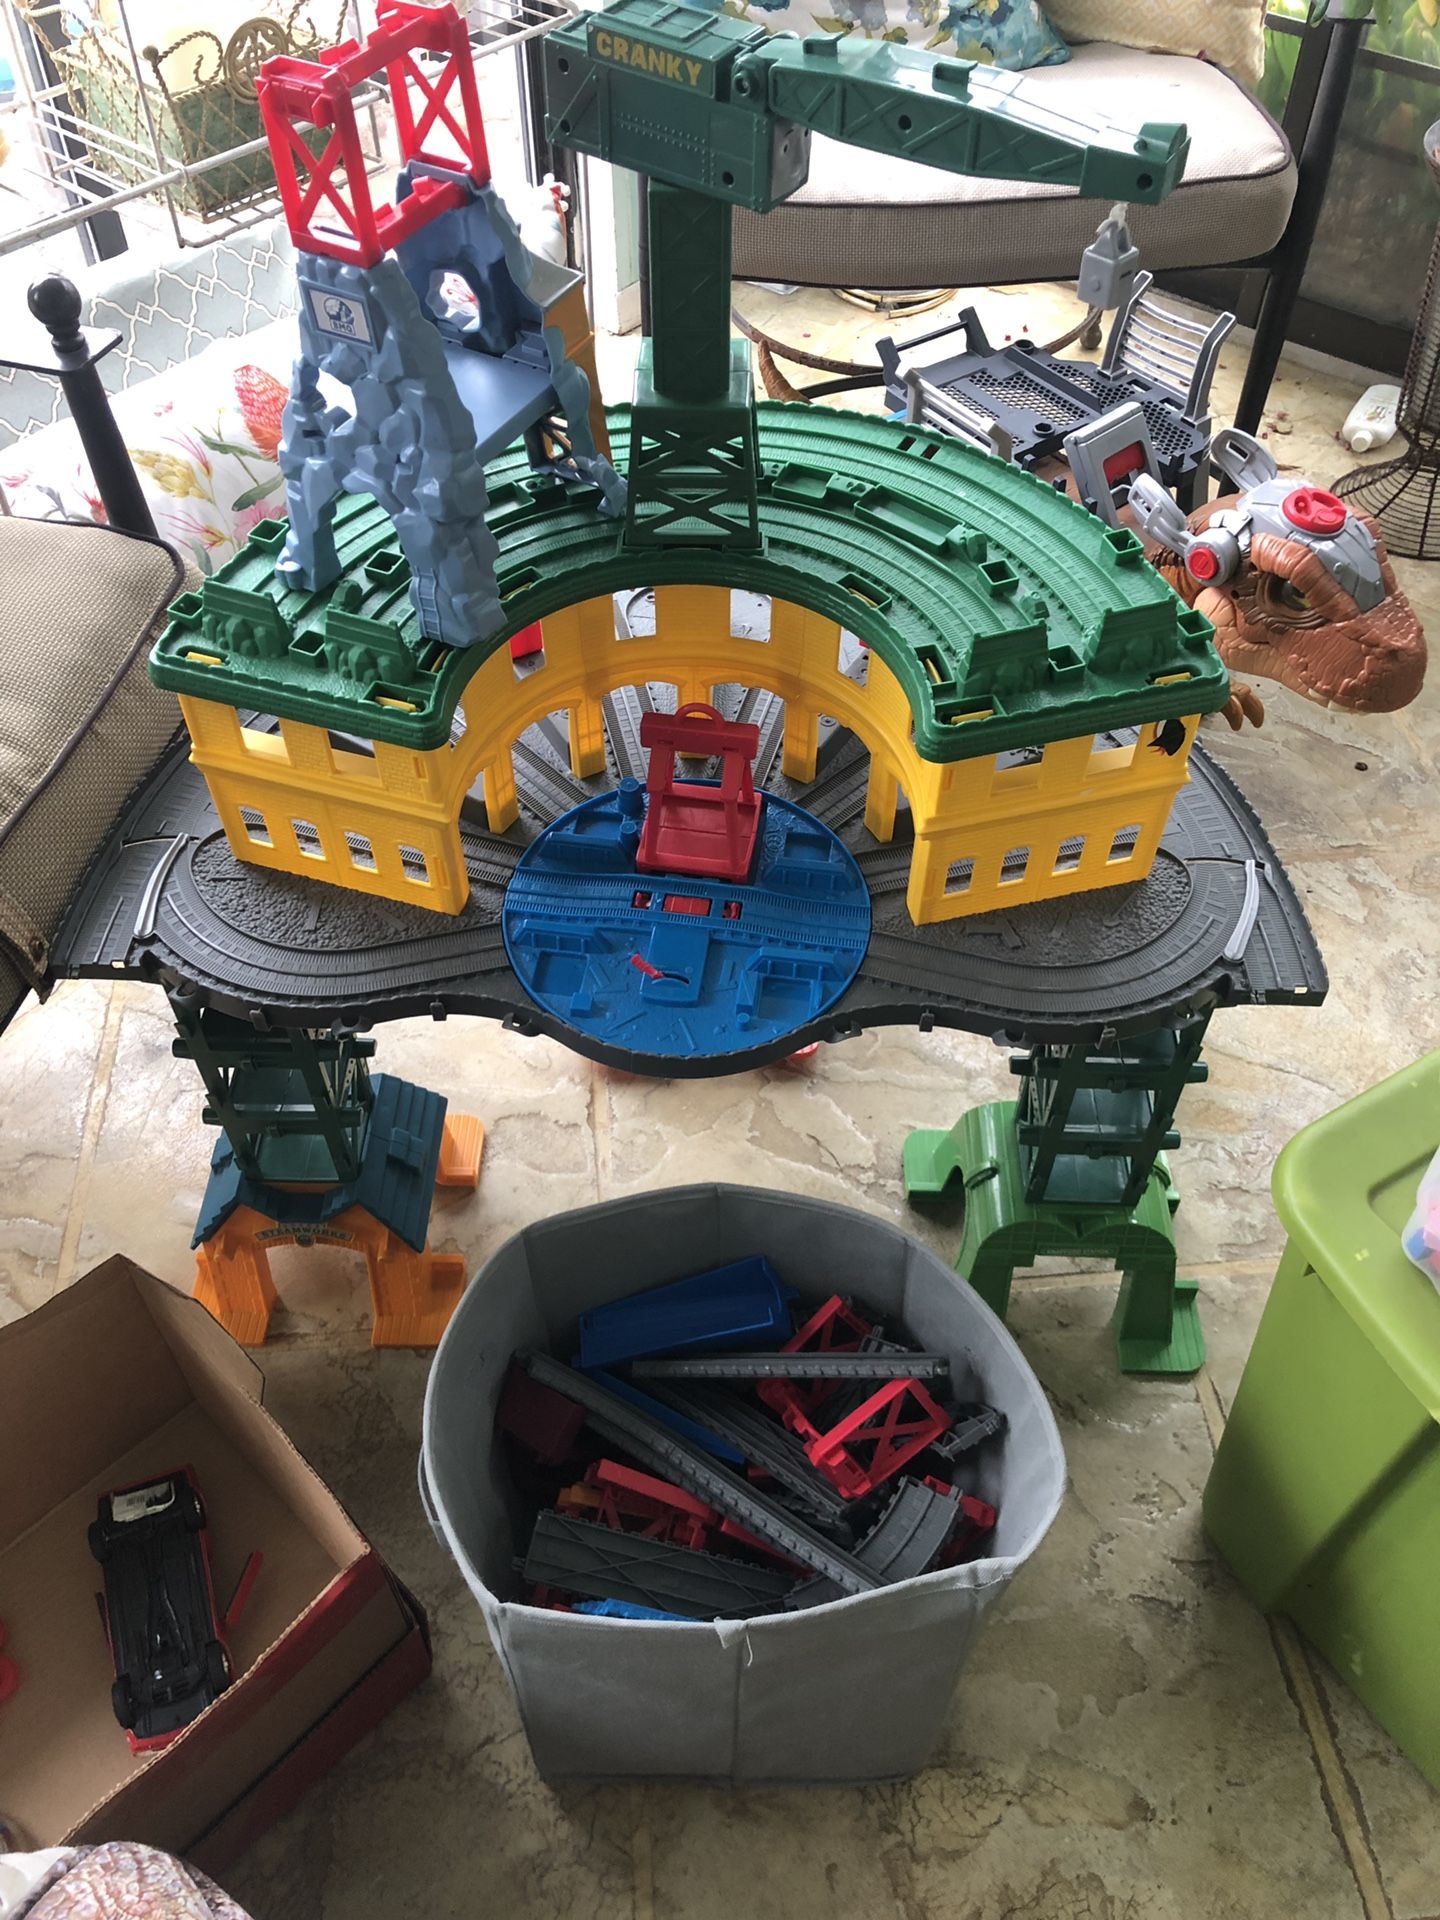 Thomas and friends Superstation track set